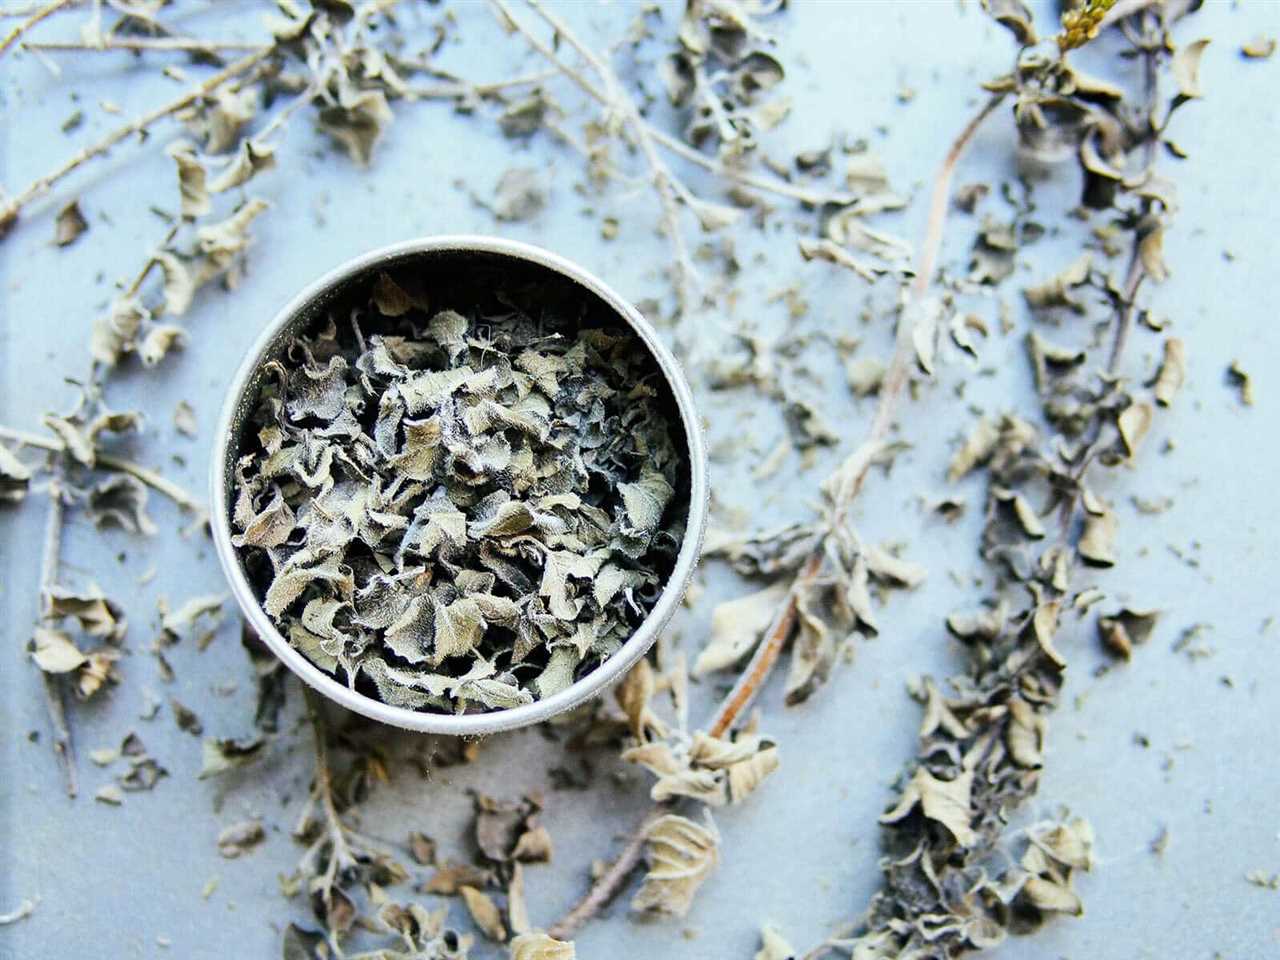 Ways to Use Dry Oregano in Your Cooking